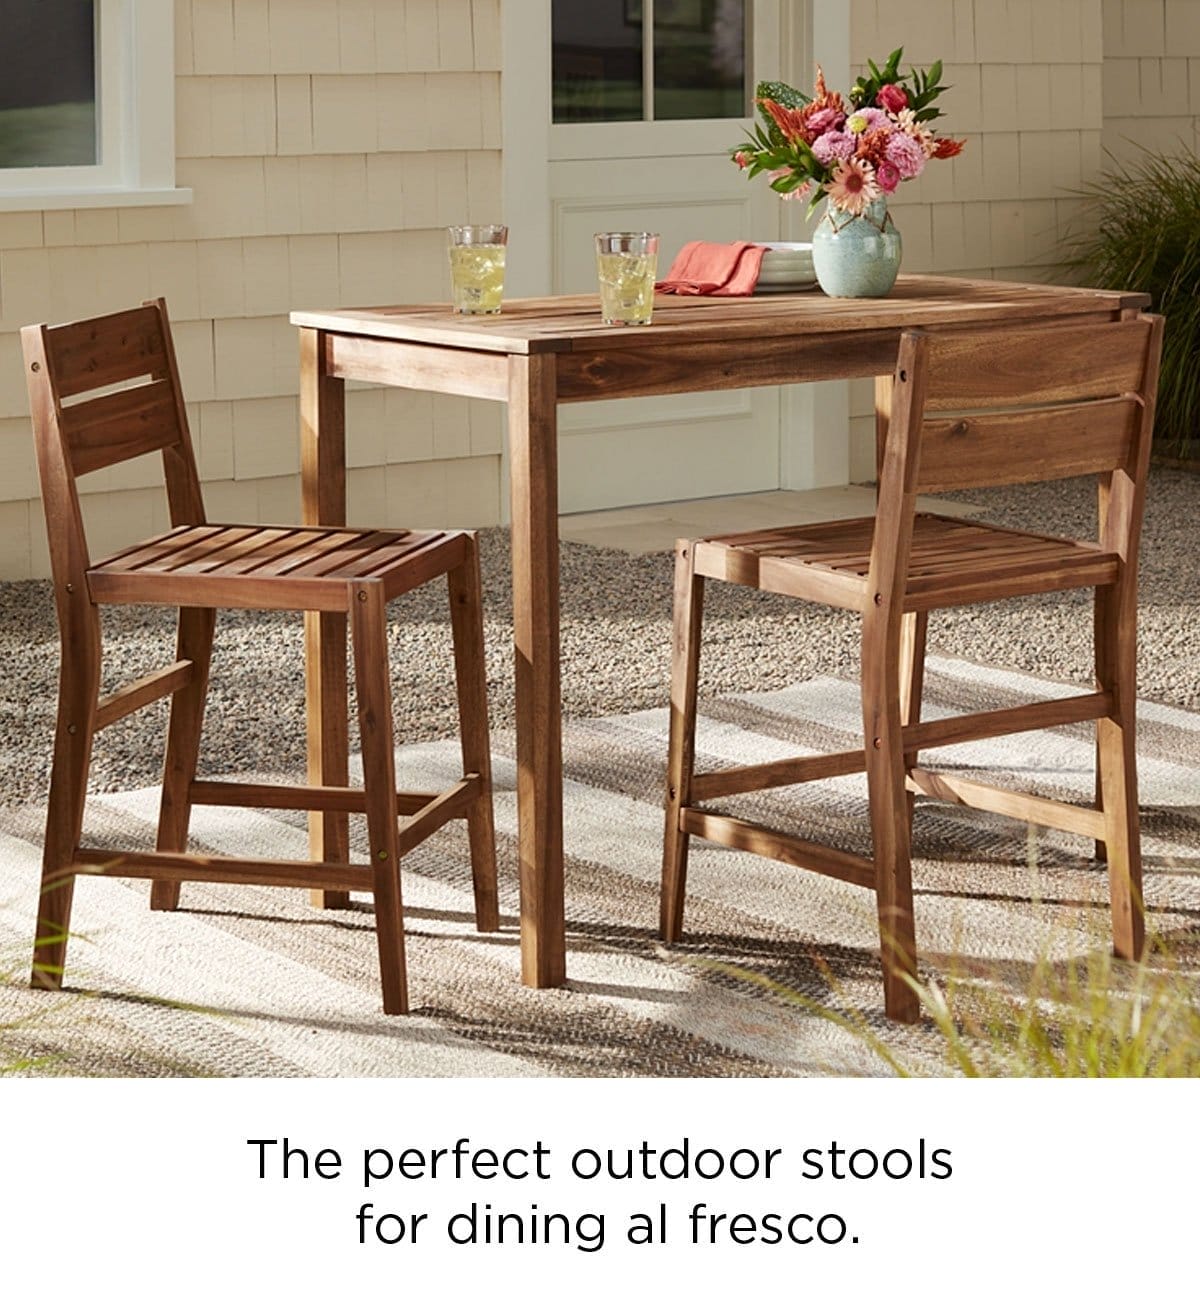 The perfect outdoor stools for dining al fresco.